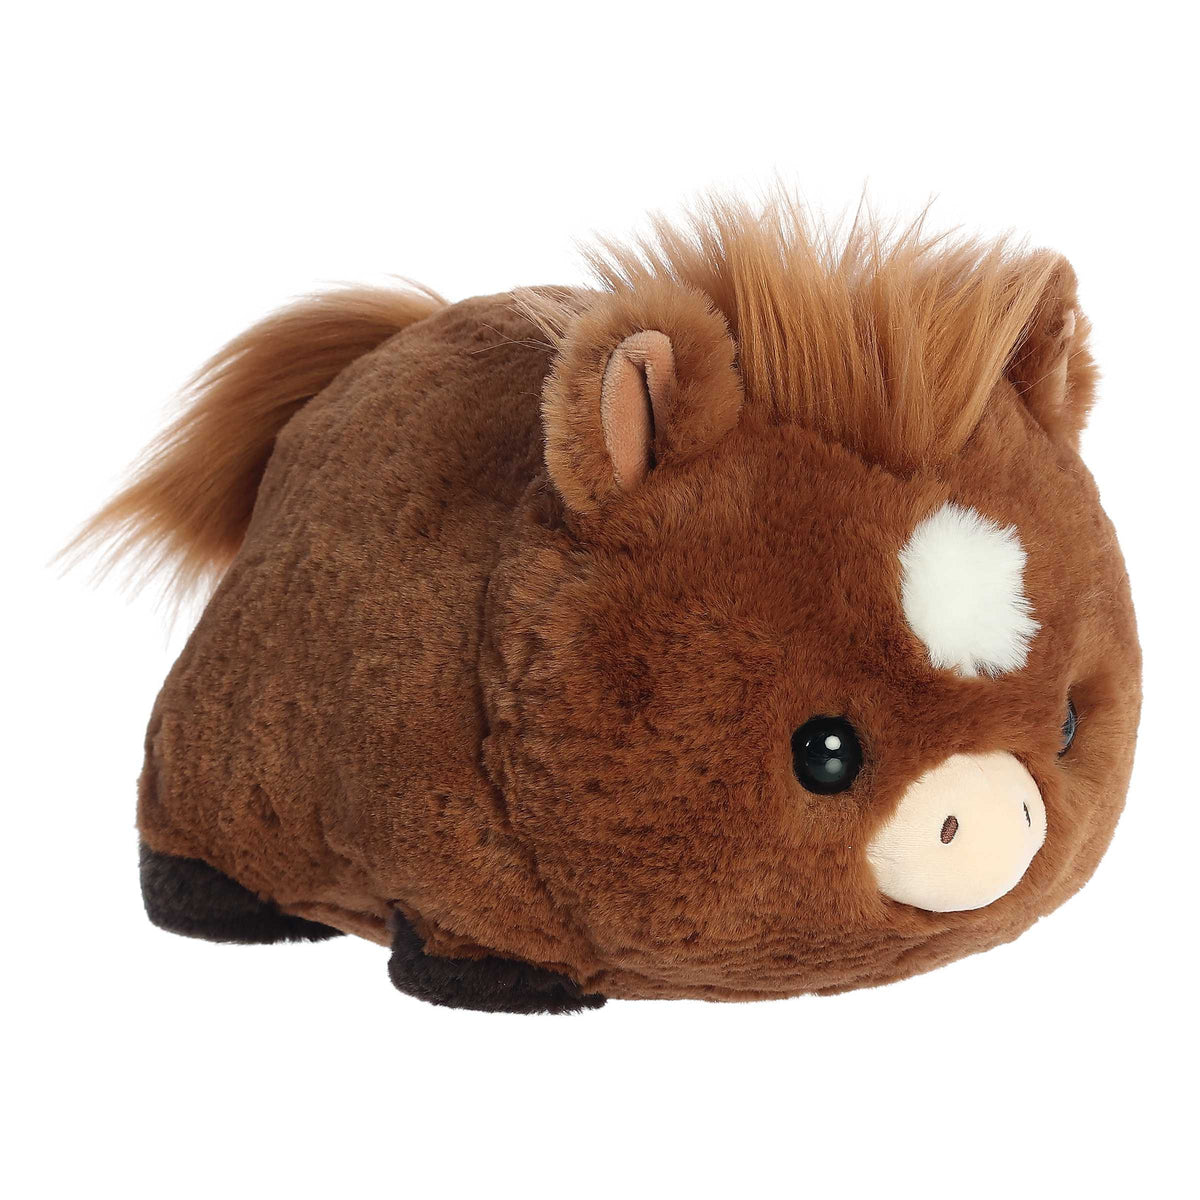 Meet the newest member of the Spudsters plushies: a charming horse with a unique potato shape for extra cuddles.